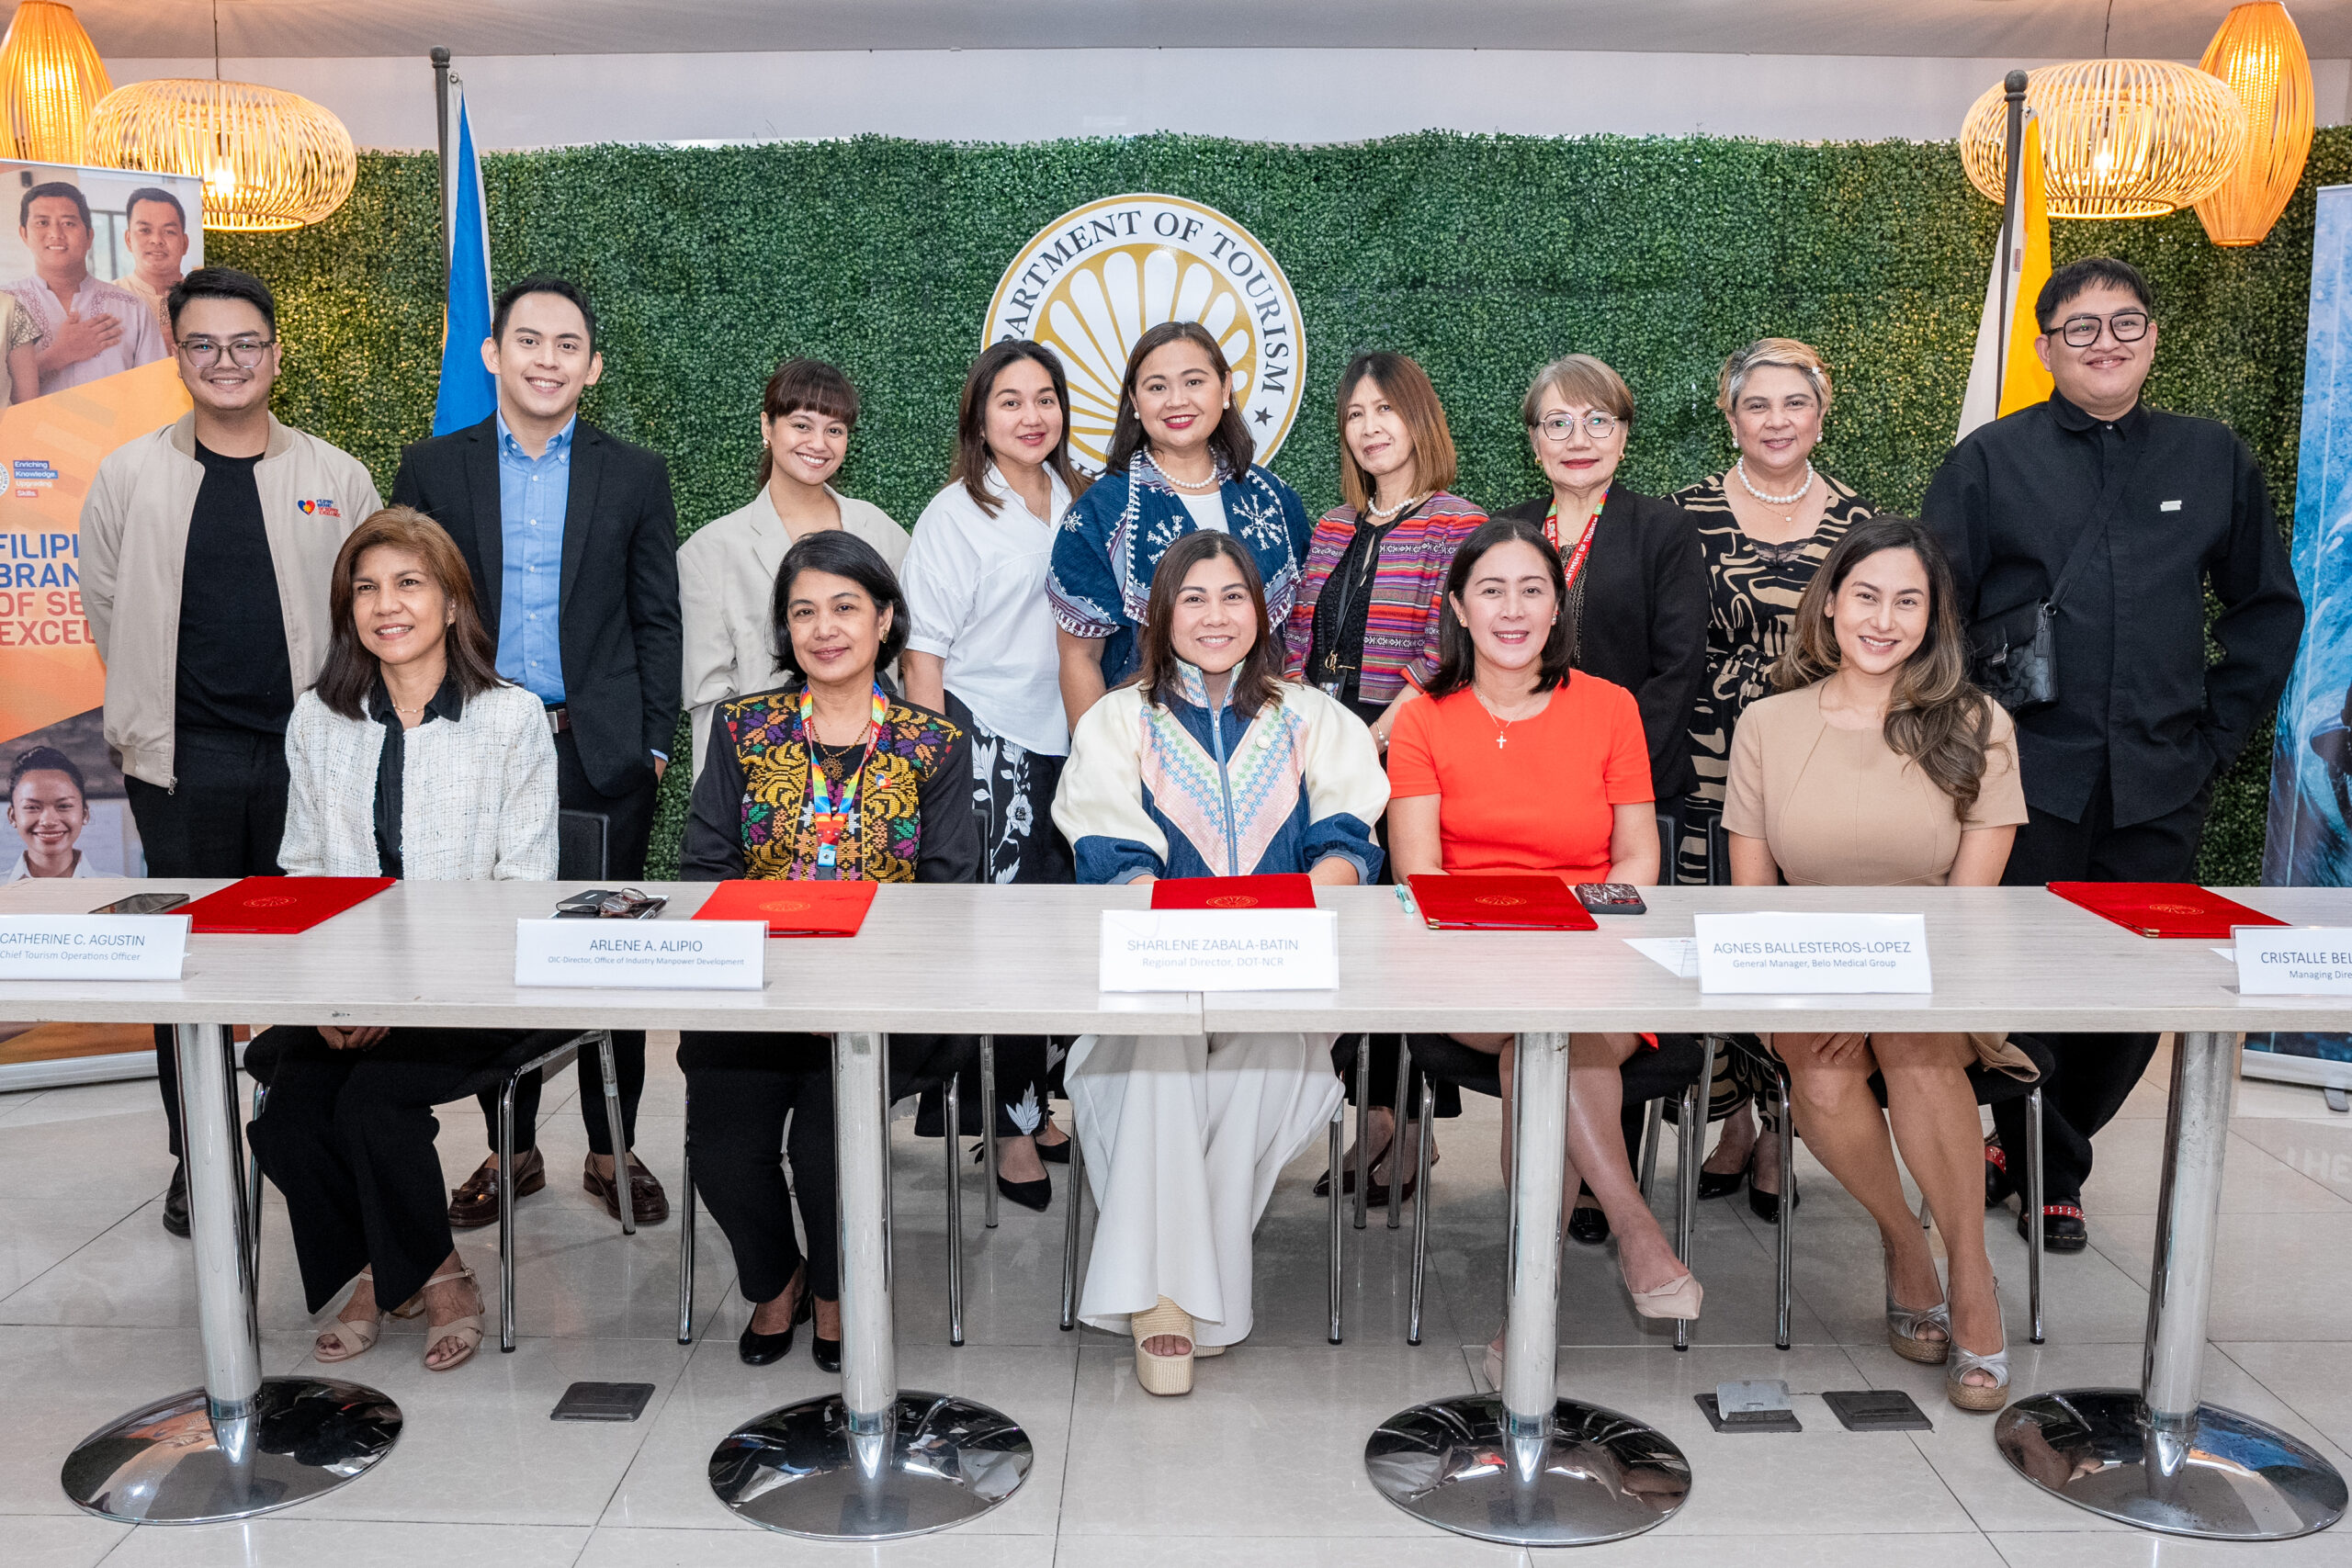 Belo Medical Group as the First and Only Clinic Accredited by the Department of Tourism in the Philippines